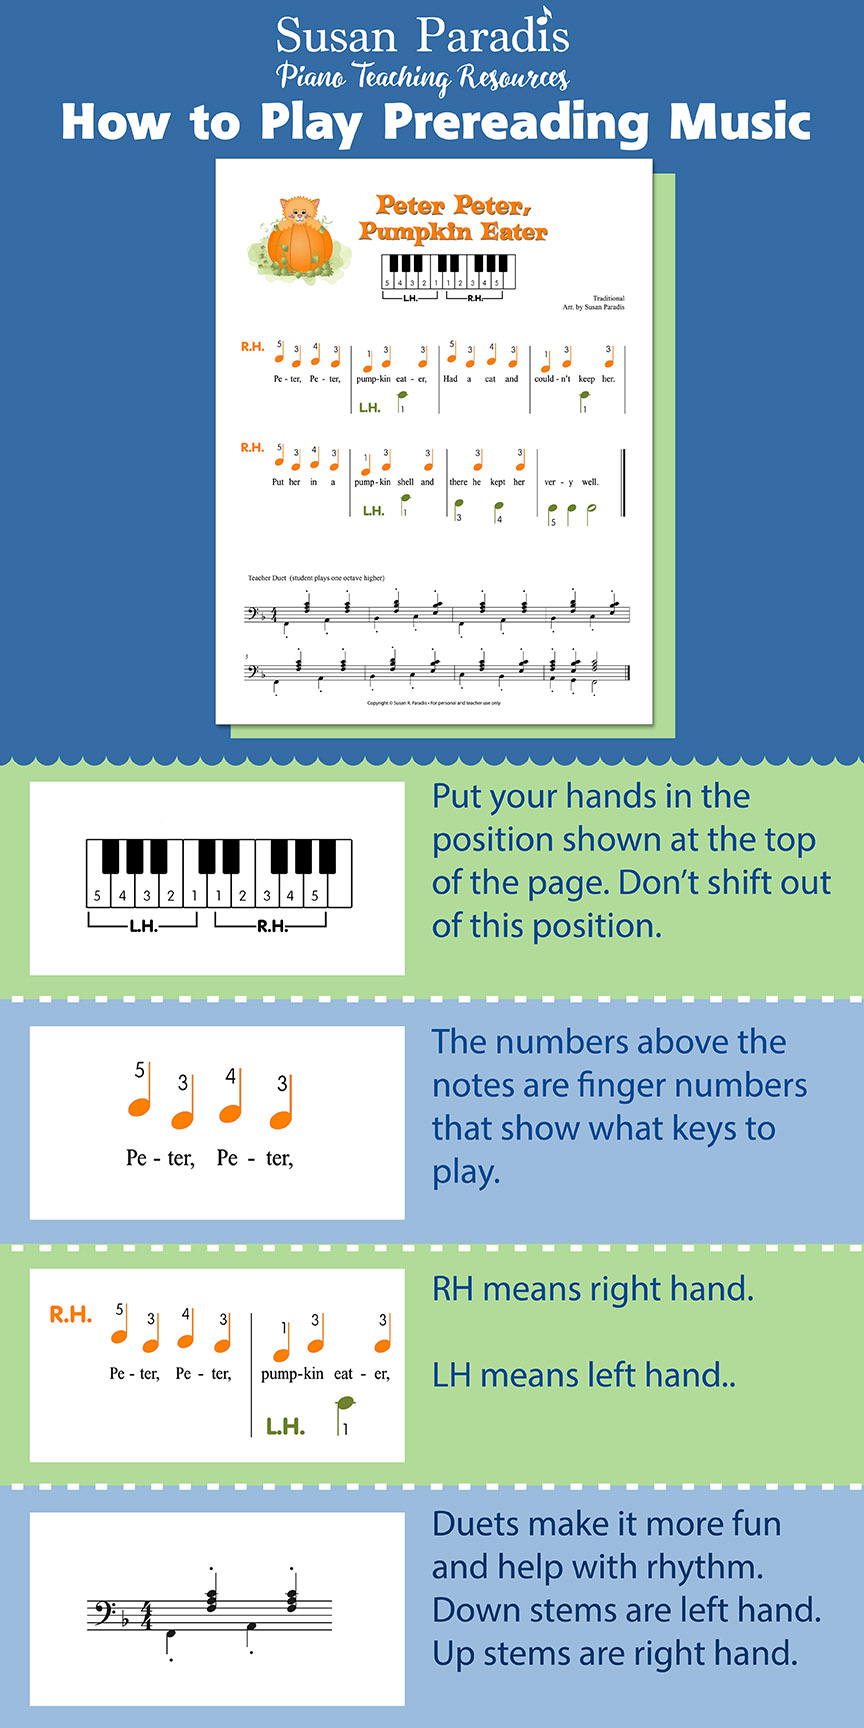 A tutorial on how to teach pre-reading piano music.